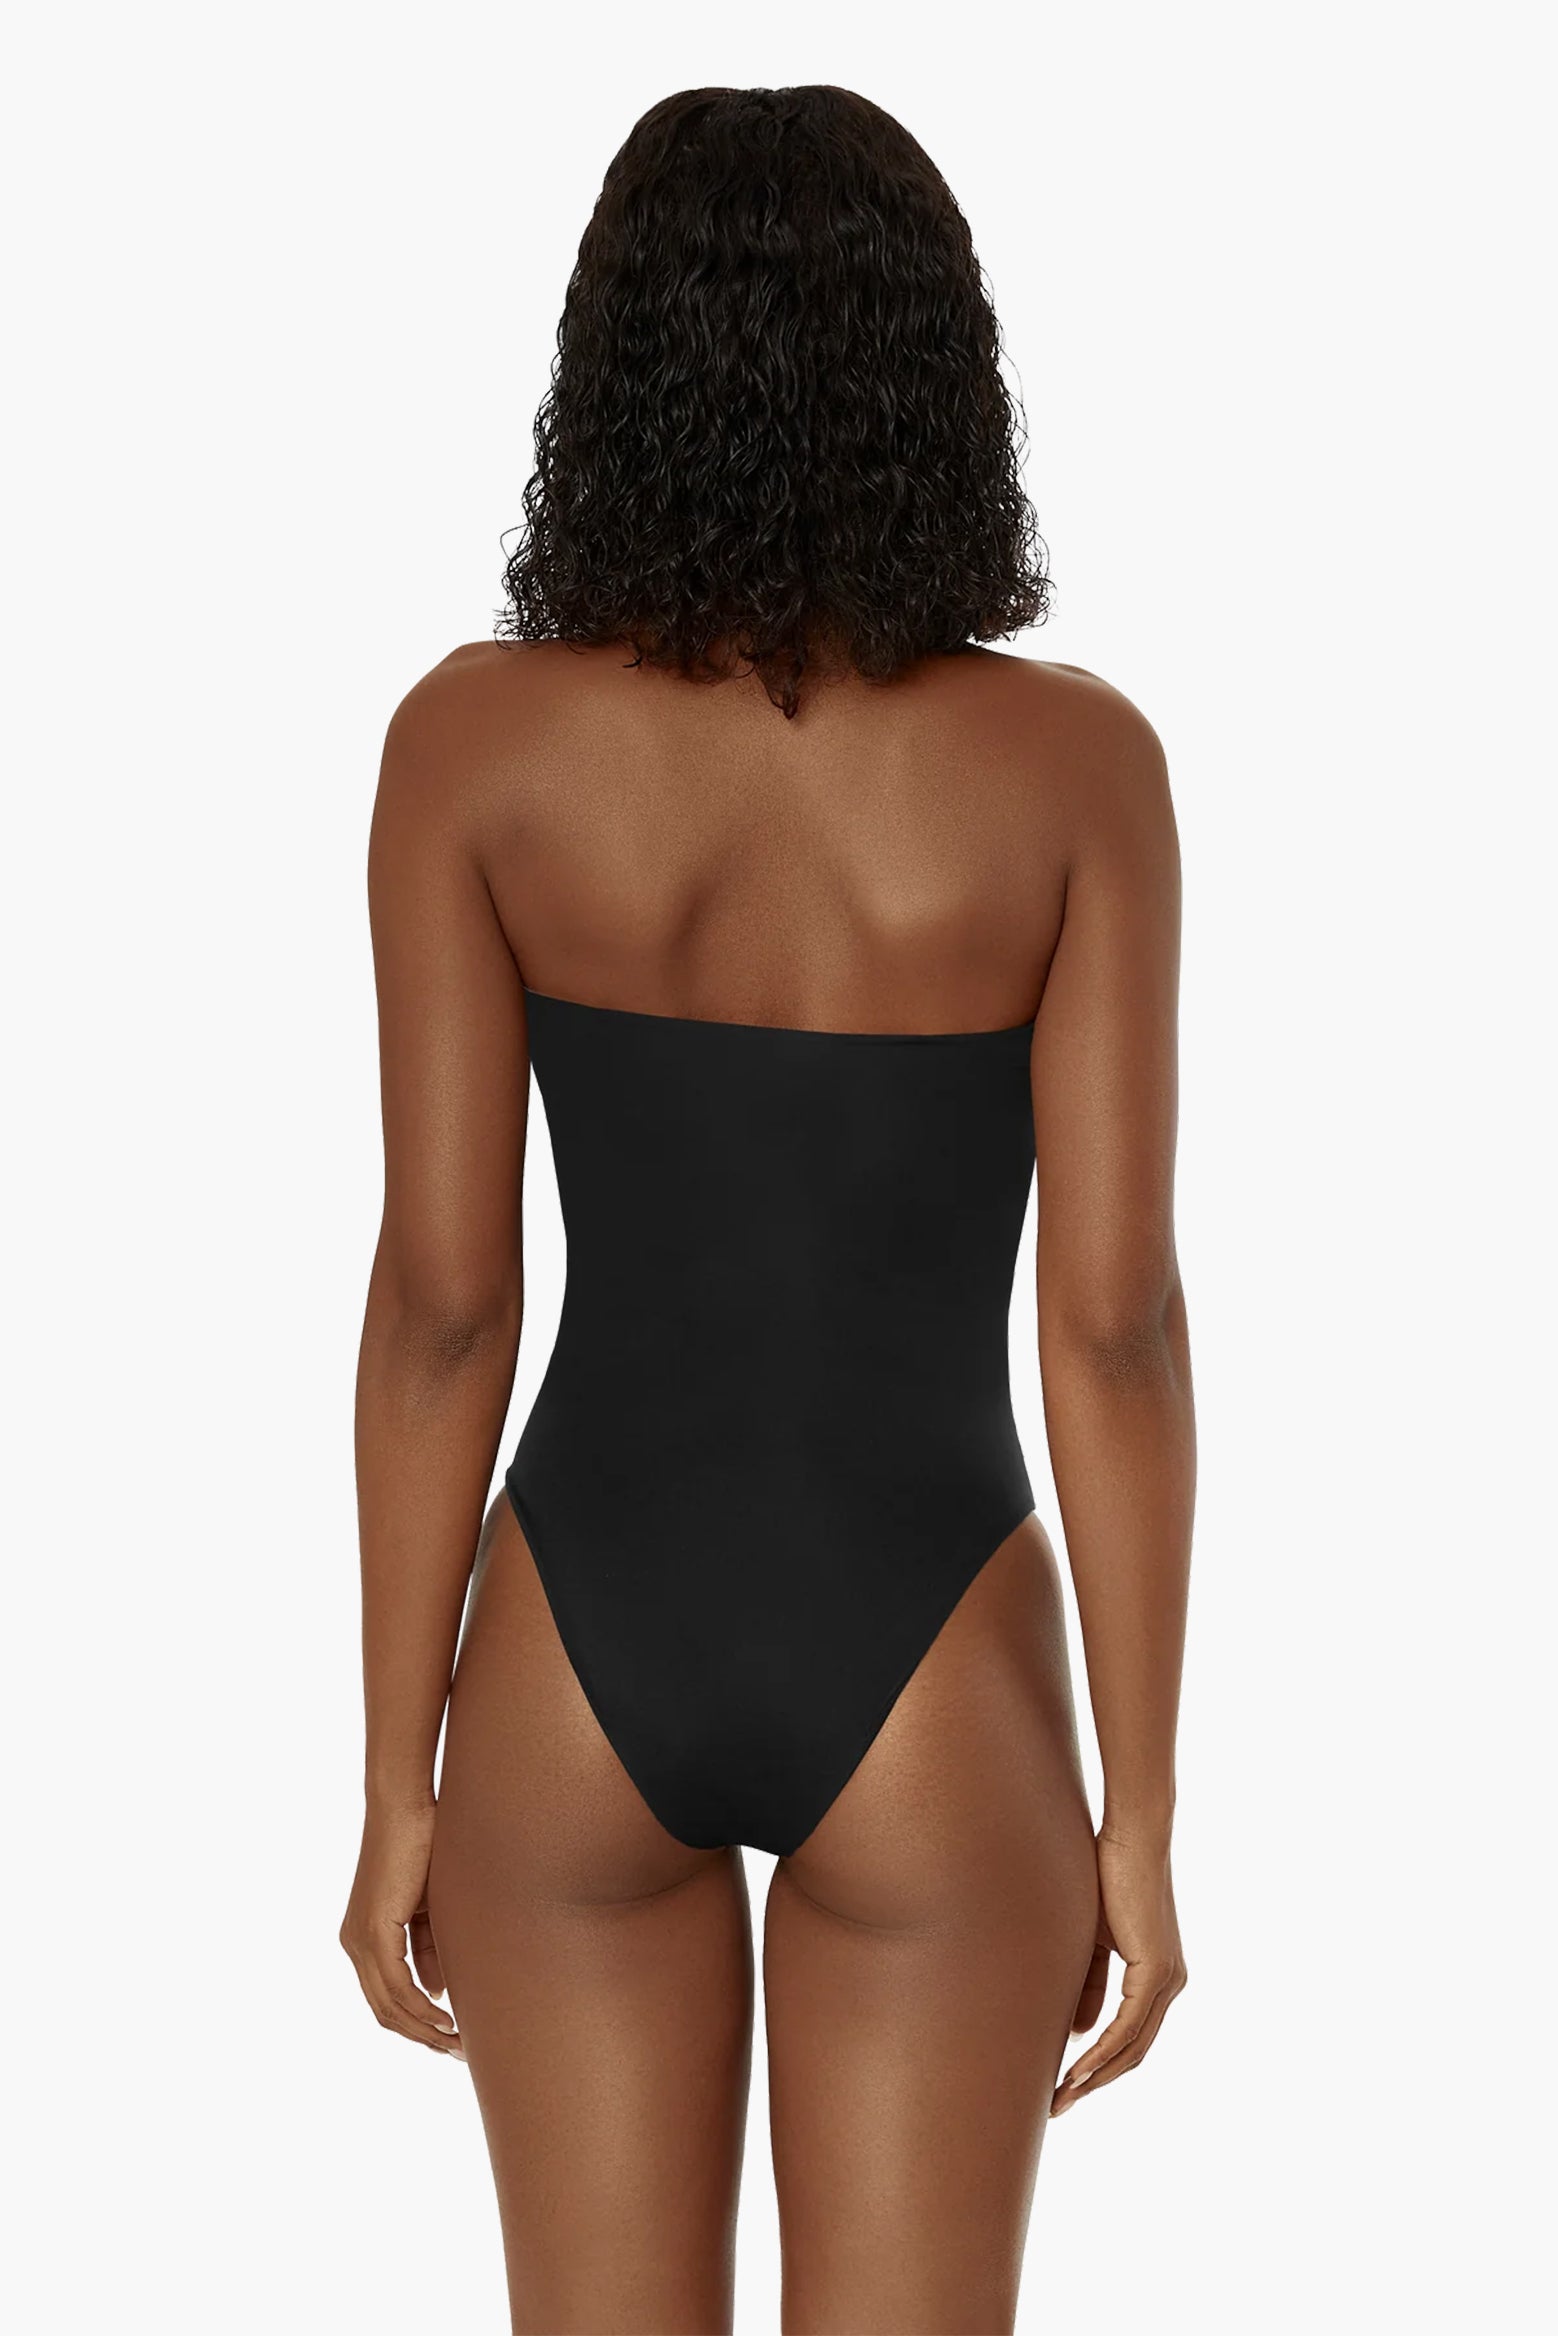 Maygel Coronel Trinitaria Swimsuit in Black available at The New Trend Australia.